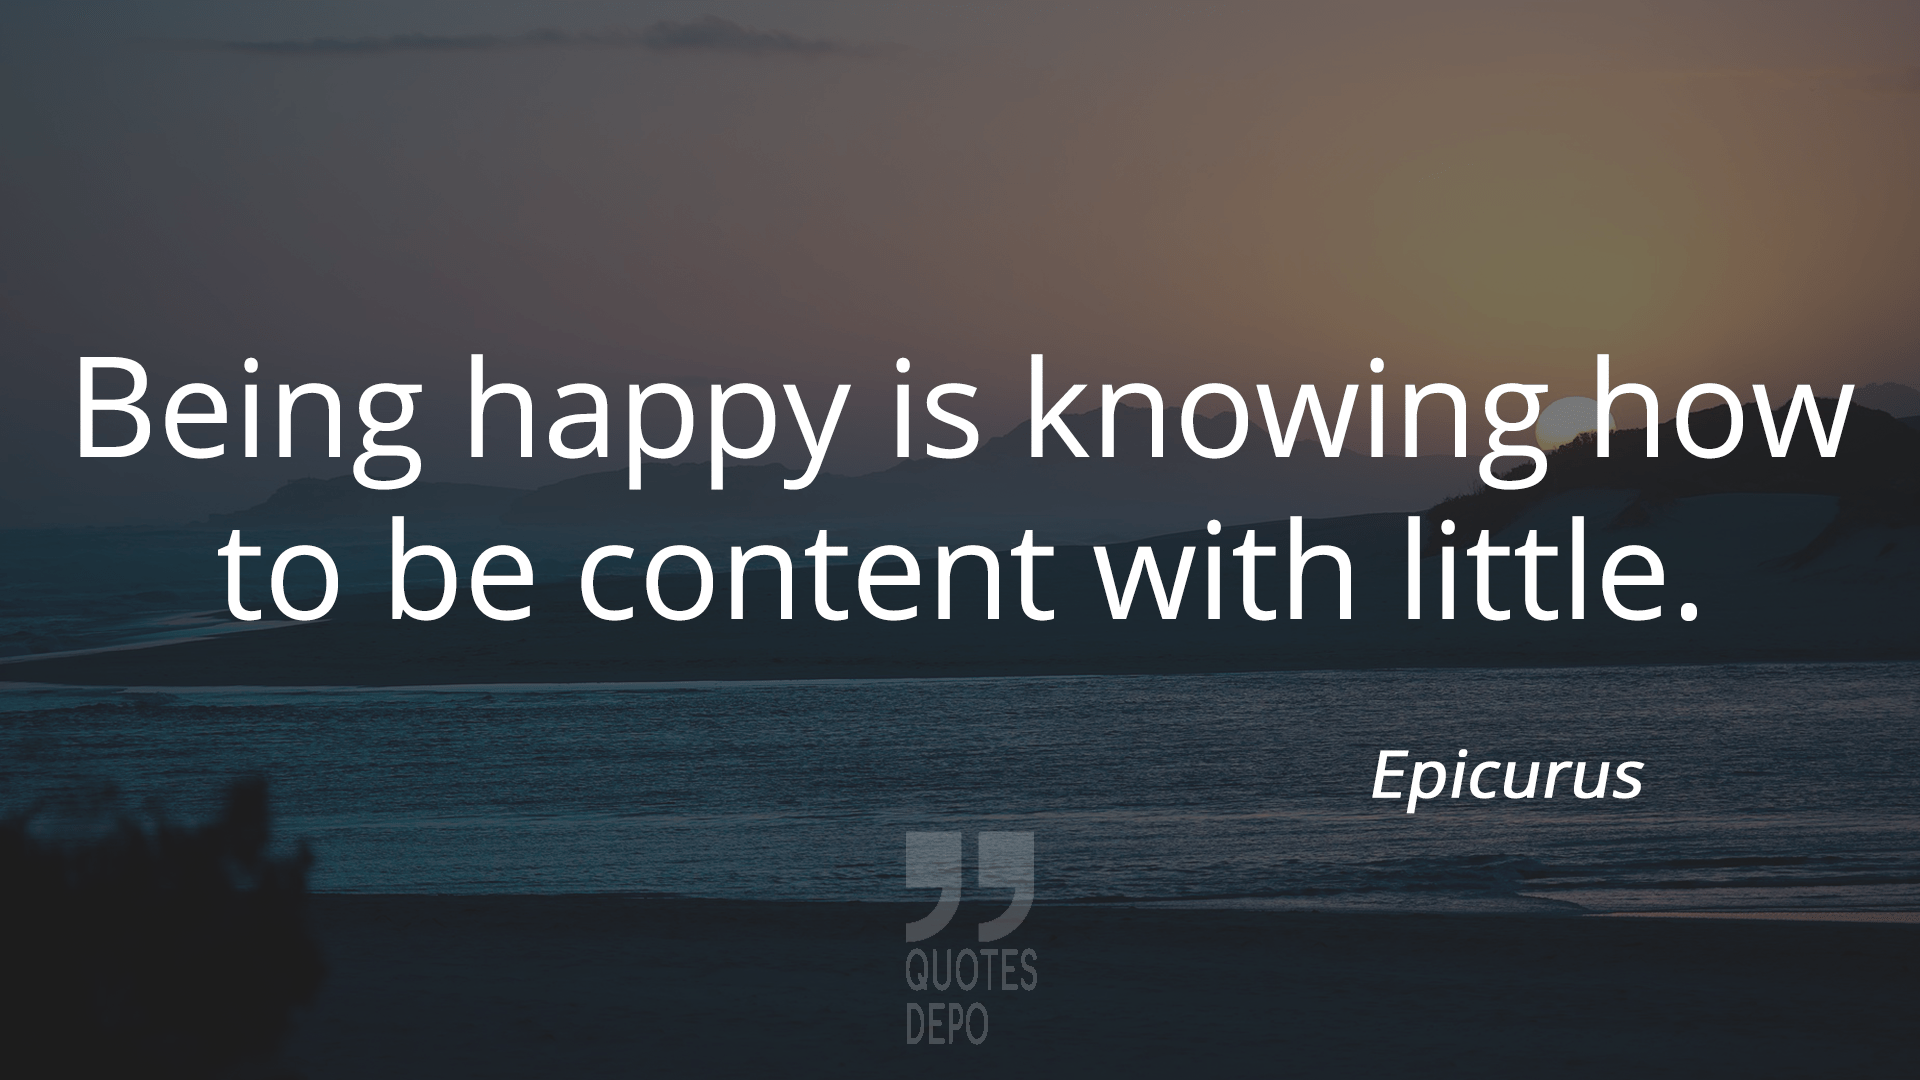 being happy is knowing how to be content with little - epicurus quotes